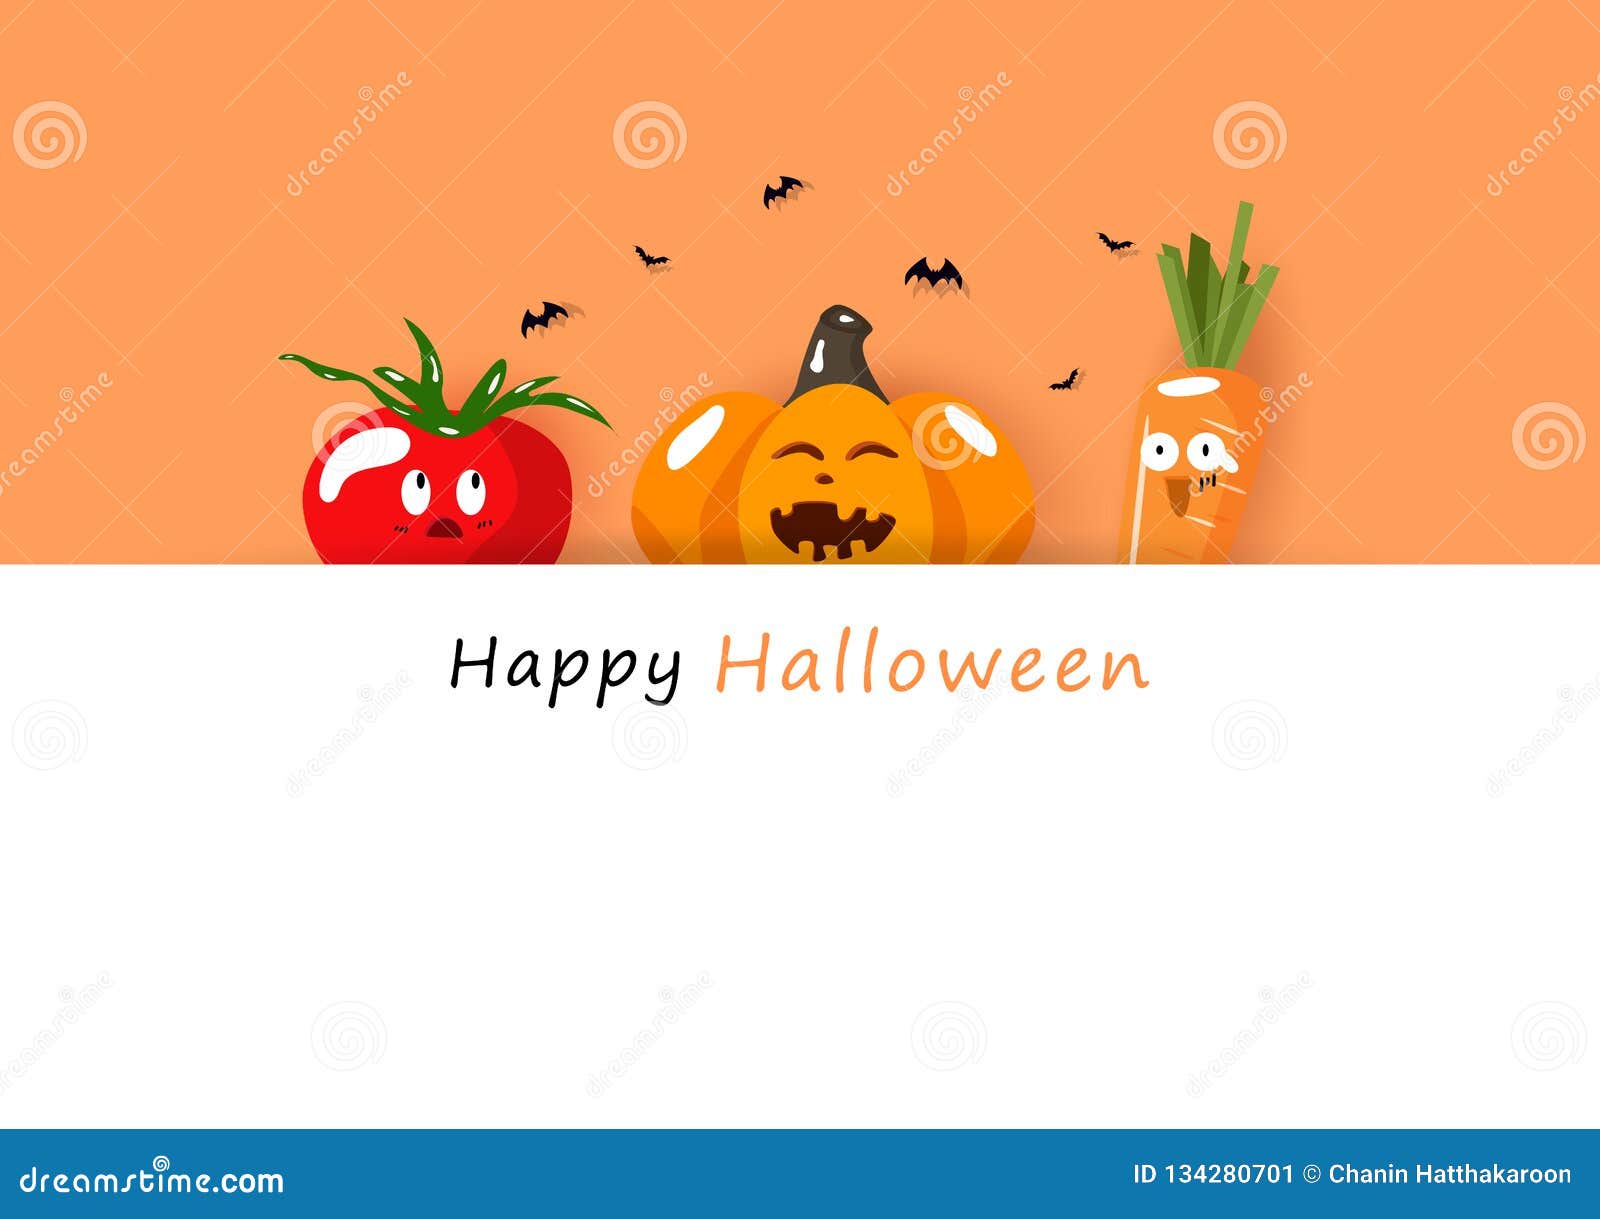 Happy Halloween Card, Cute Pumpkin, Tomato And Carrot Emotion ...